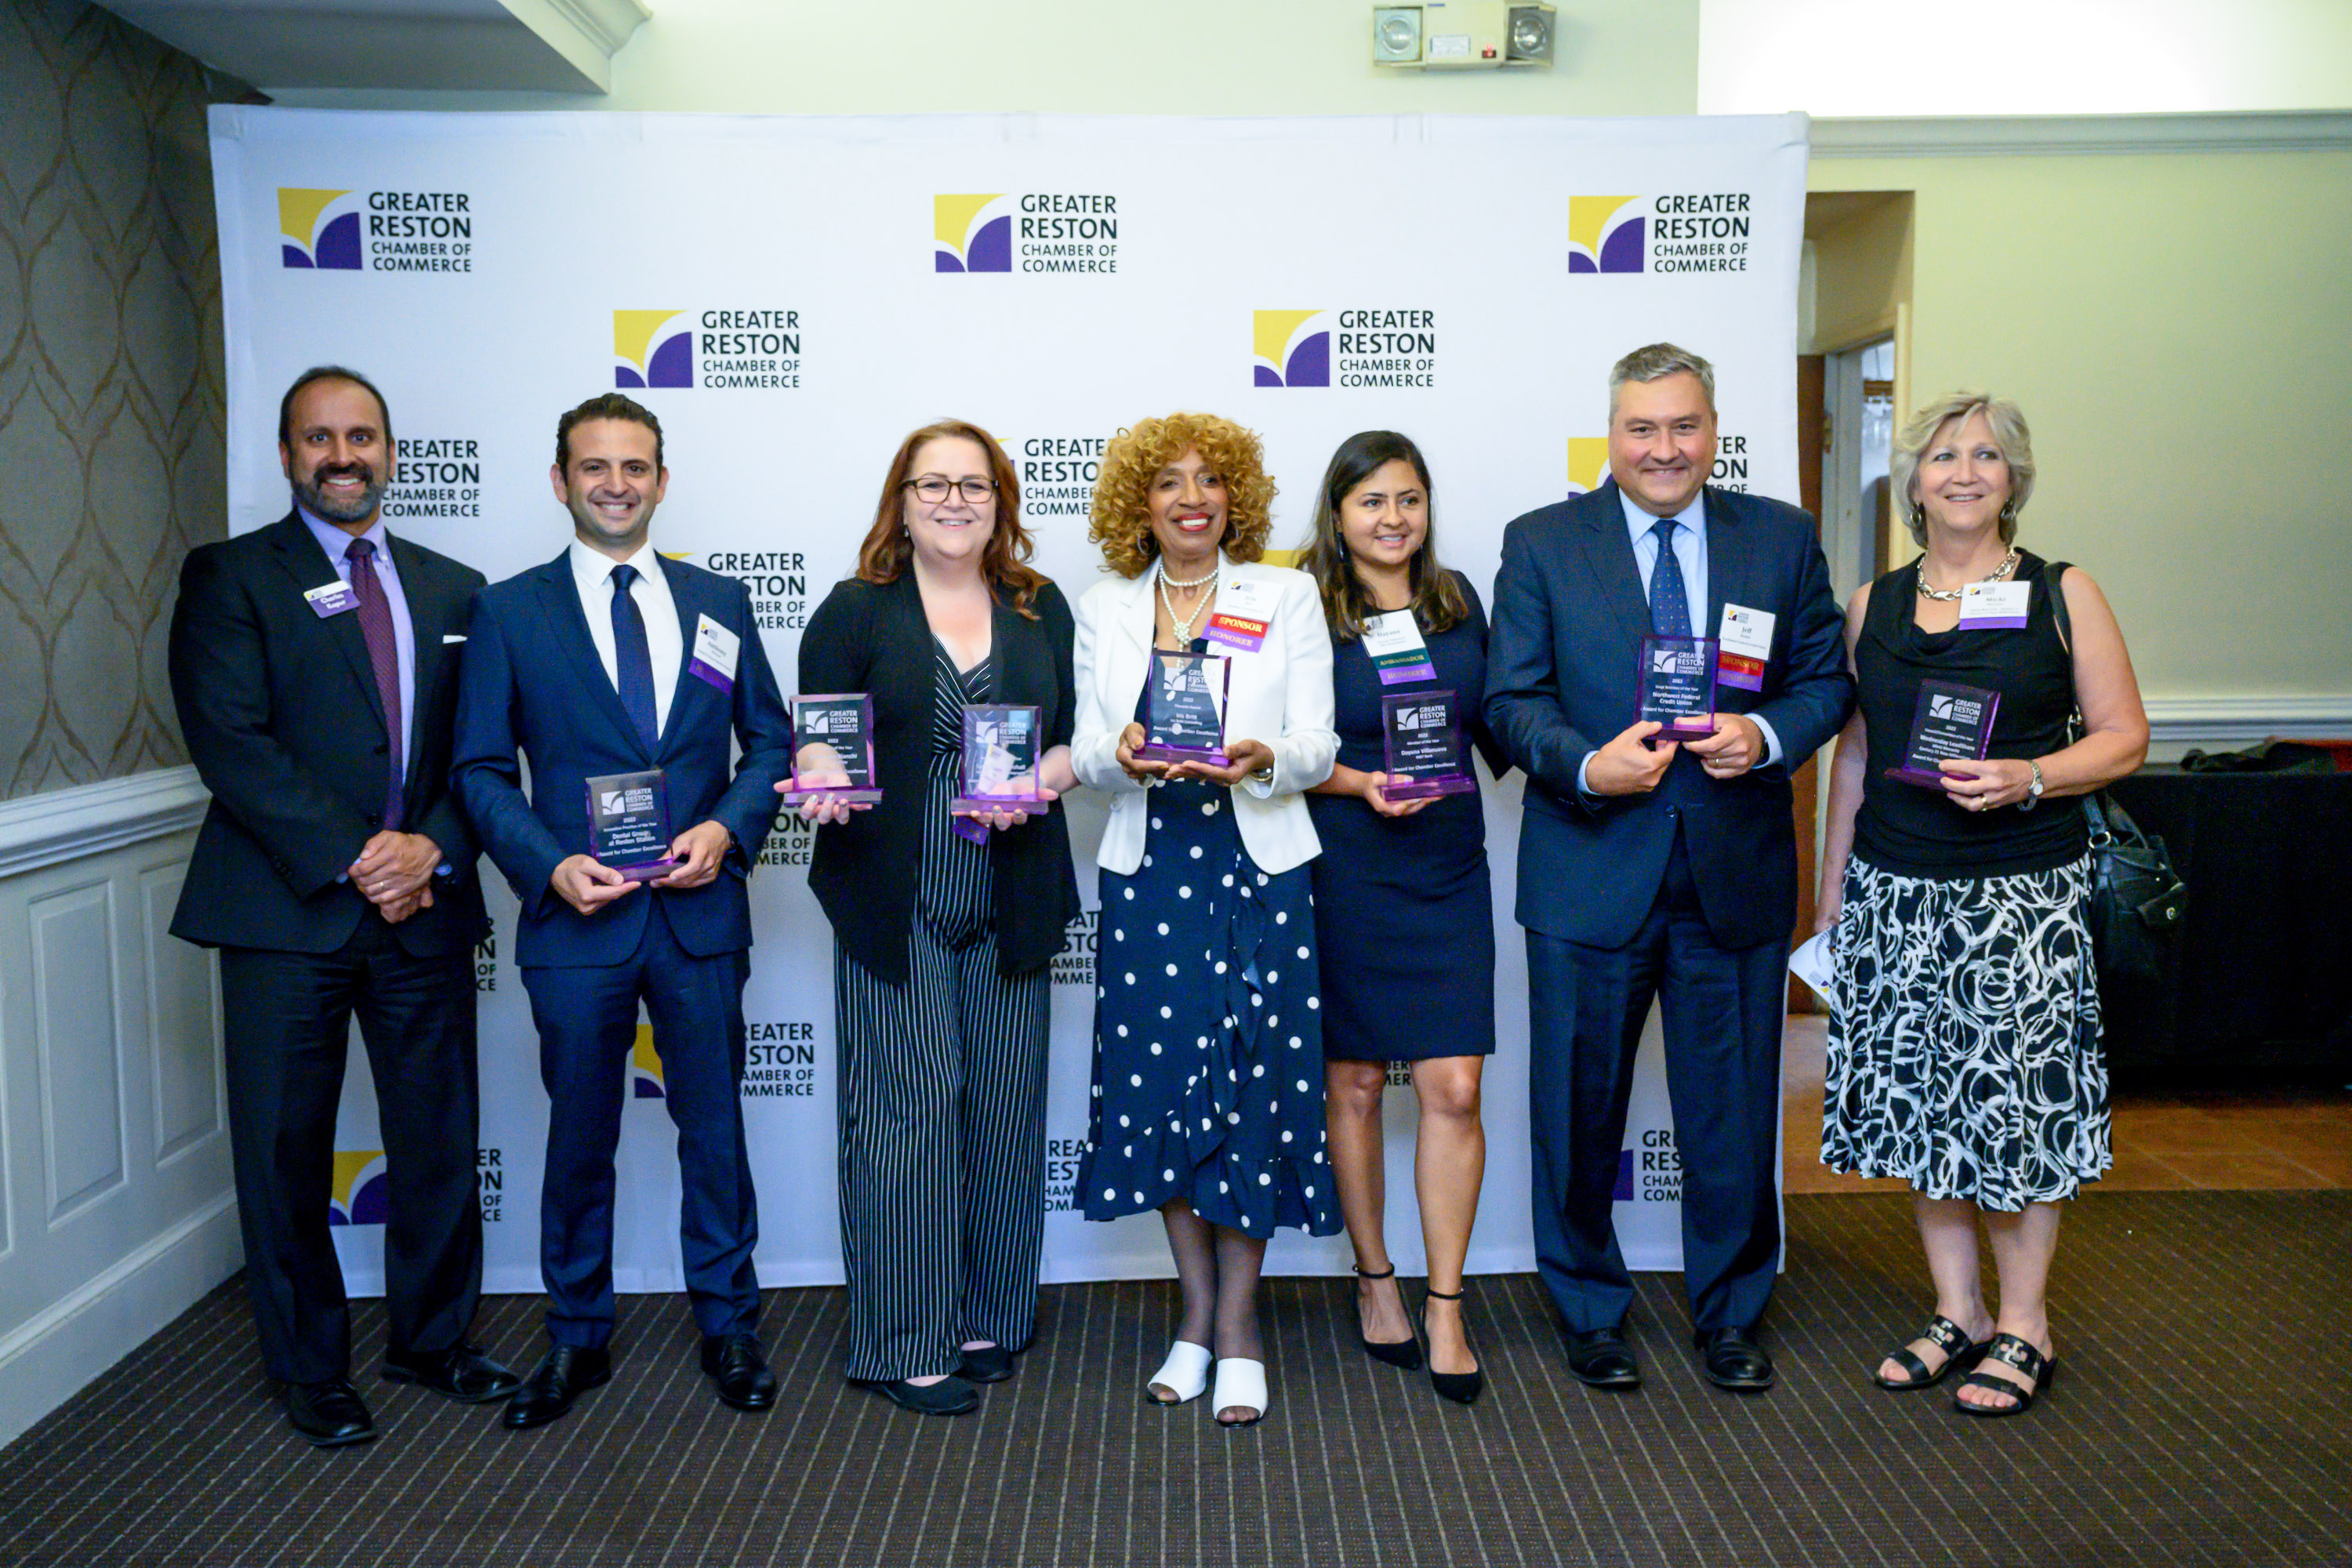 The 2022-2023 Greater Reston Chamber of Commerce Board of Directors Installed and Awards for Chamber Excellence Winners Announced